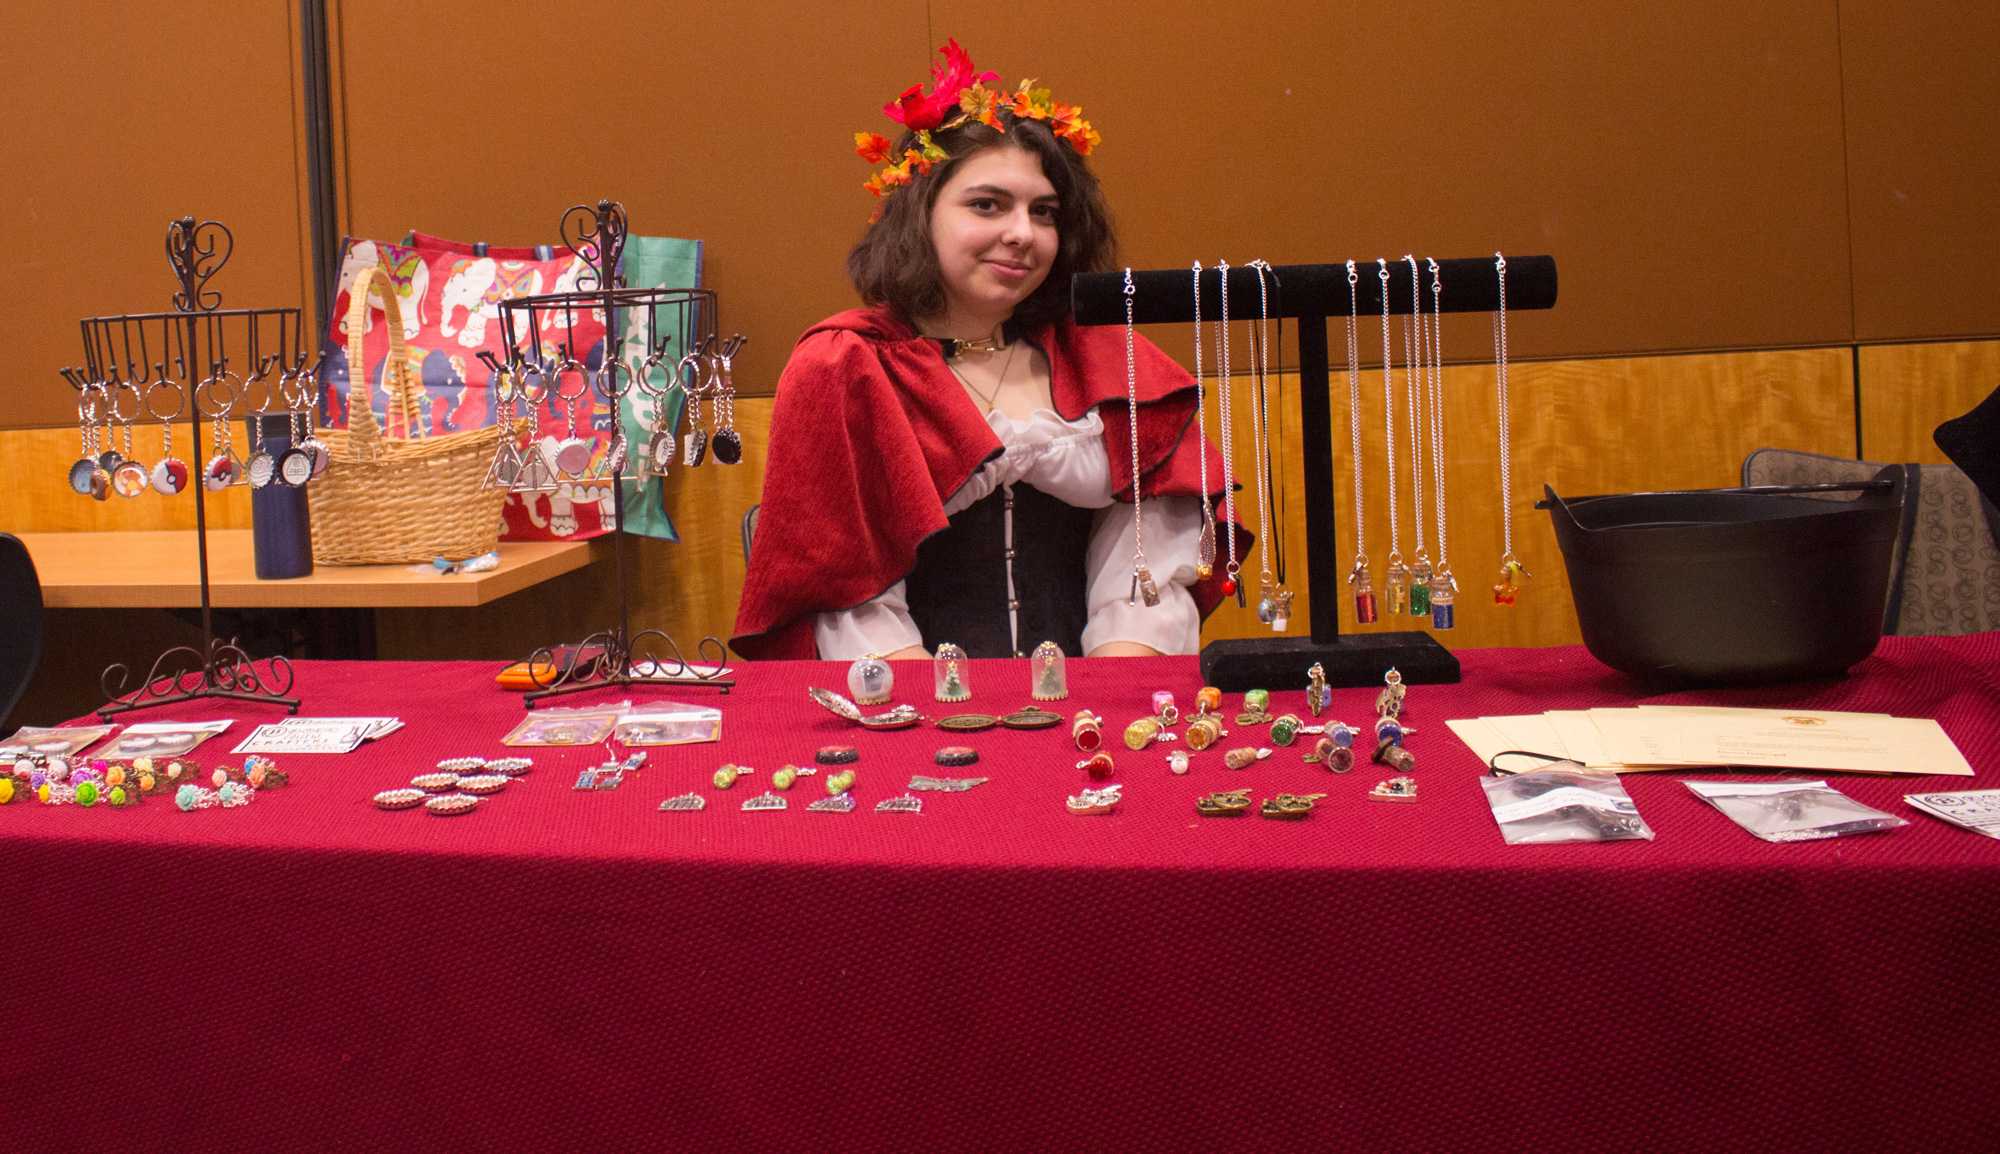 Emily Chandler at her contact table where she sells jewelry during NerdCon. The event was held on Saturday, April 23 from 10:00 a.m. to 9:00 p.m. in Plemmons Student Union. Photo by Aaron Moran.